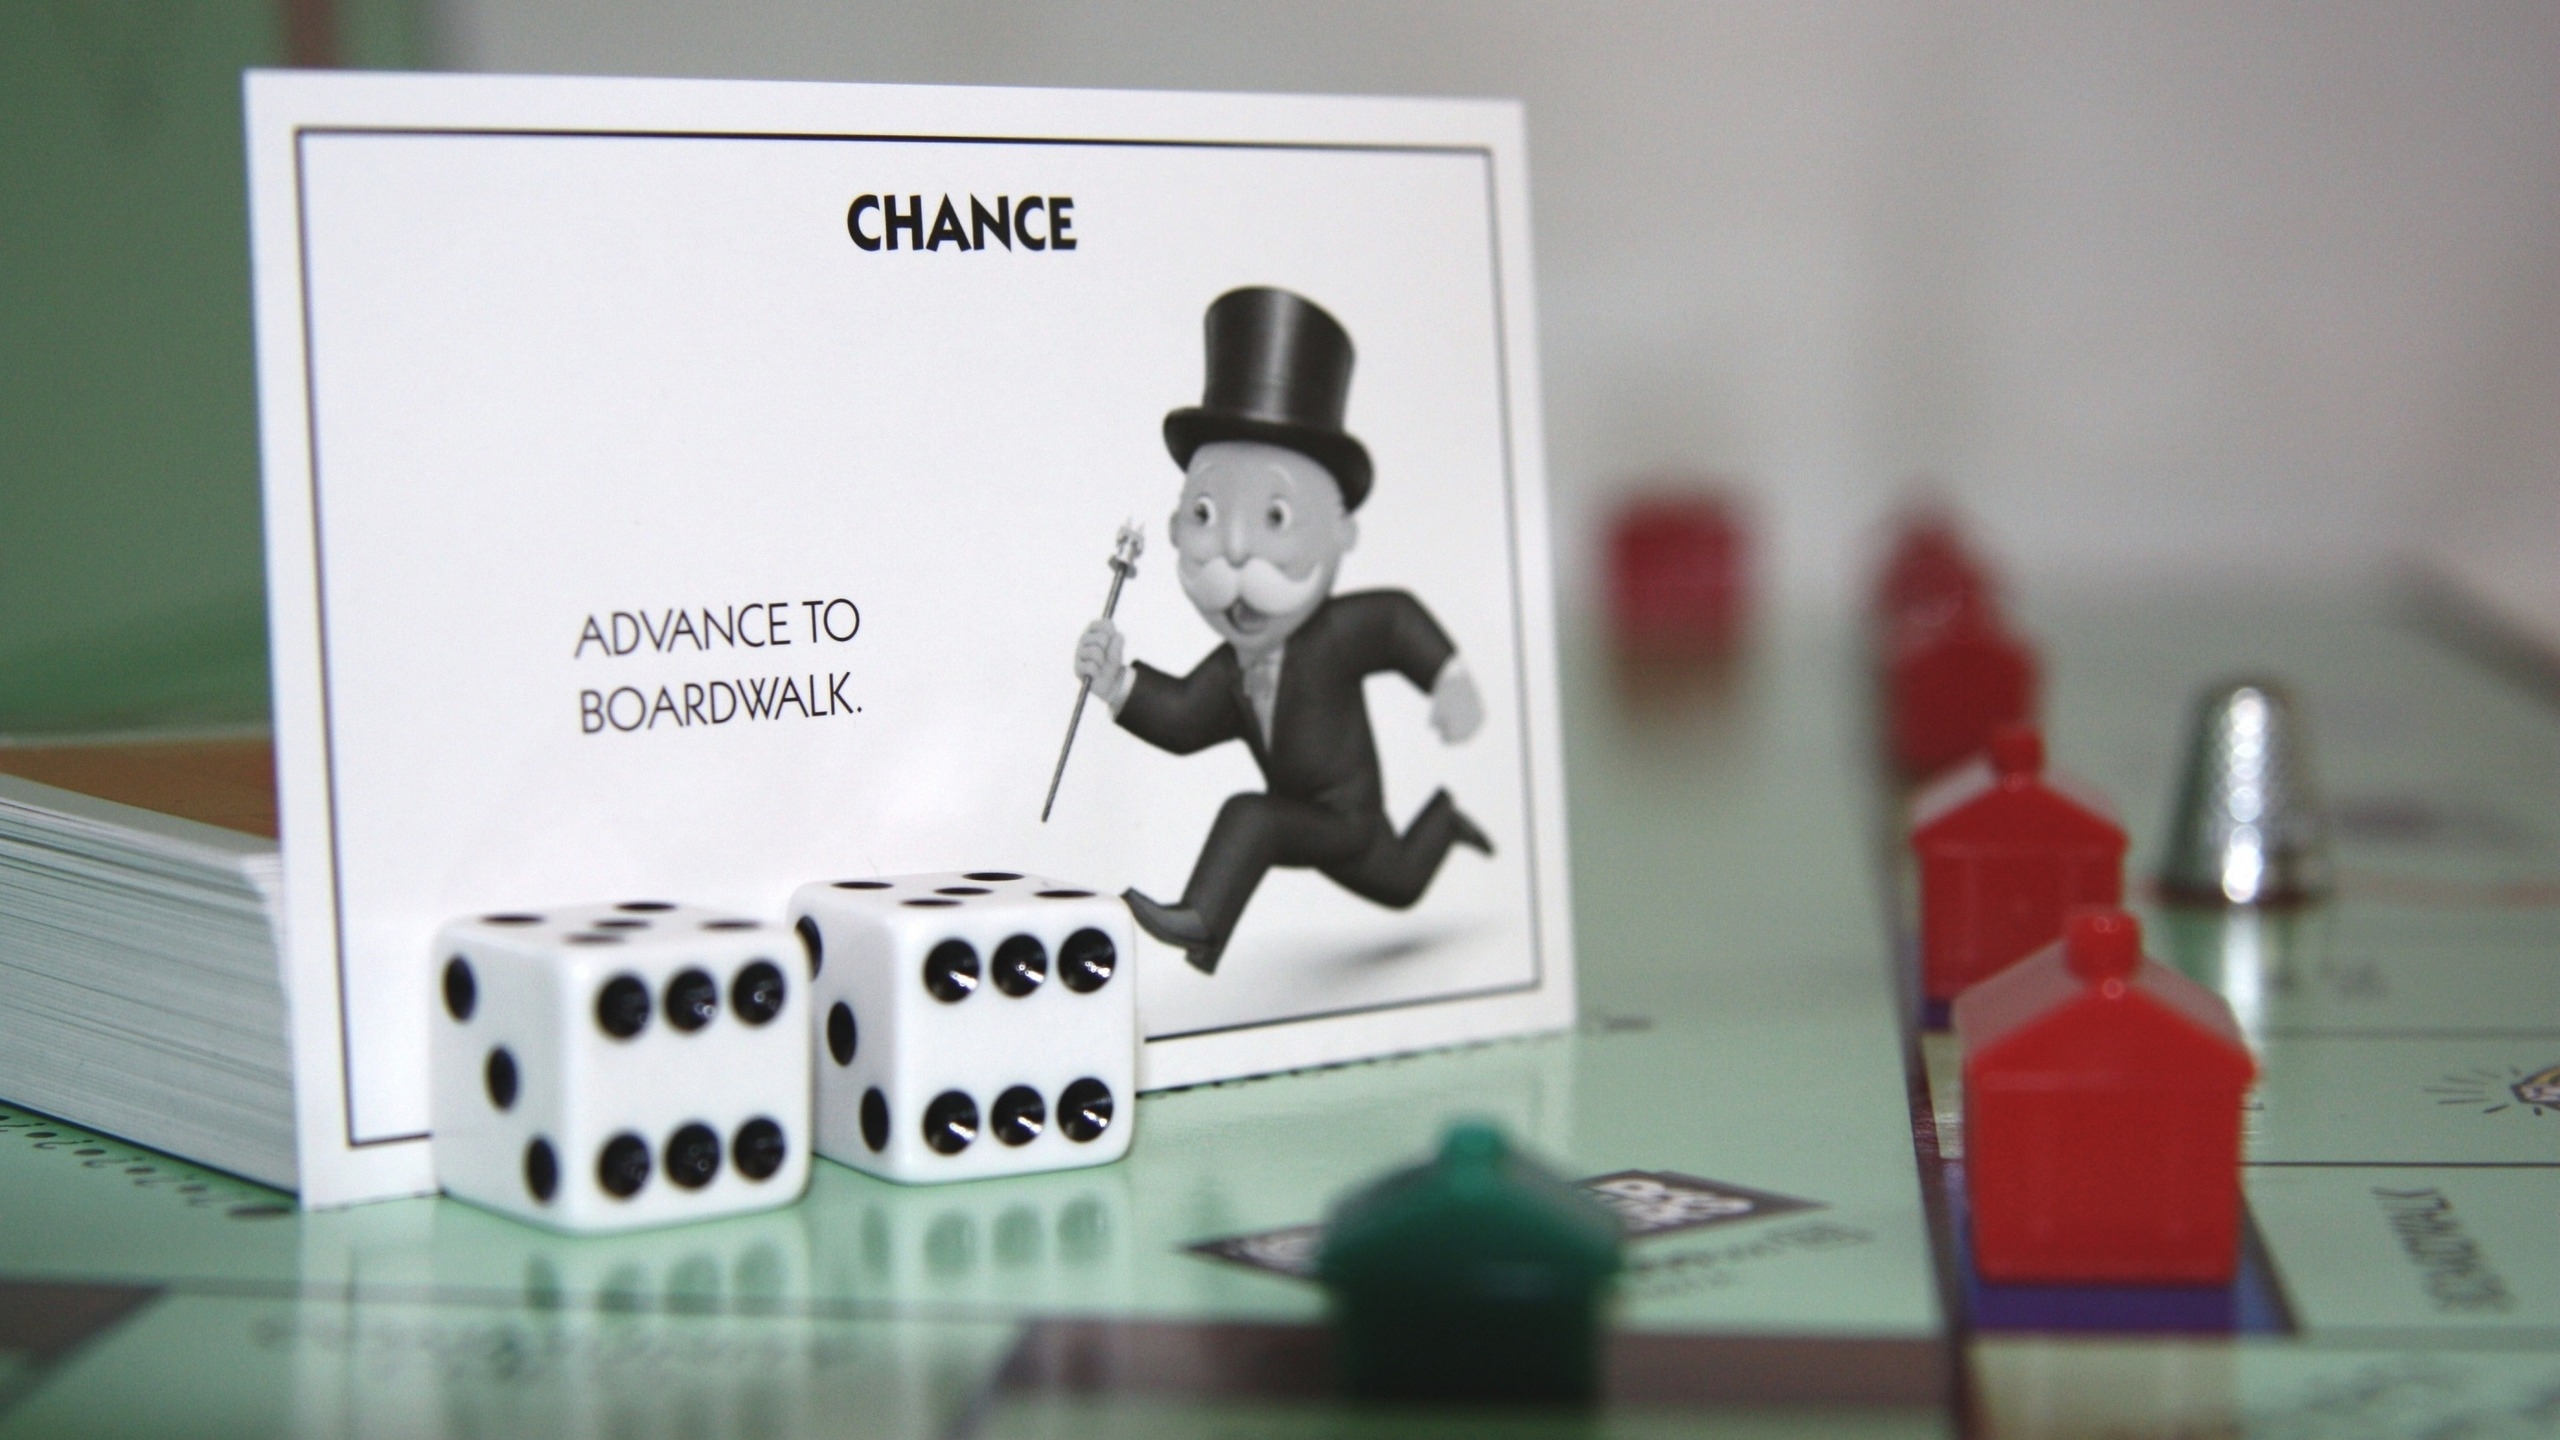 Monopoly for 2560x1440 HDTV resolution